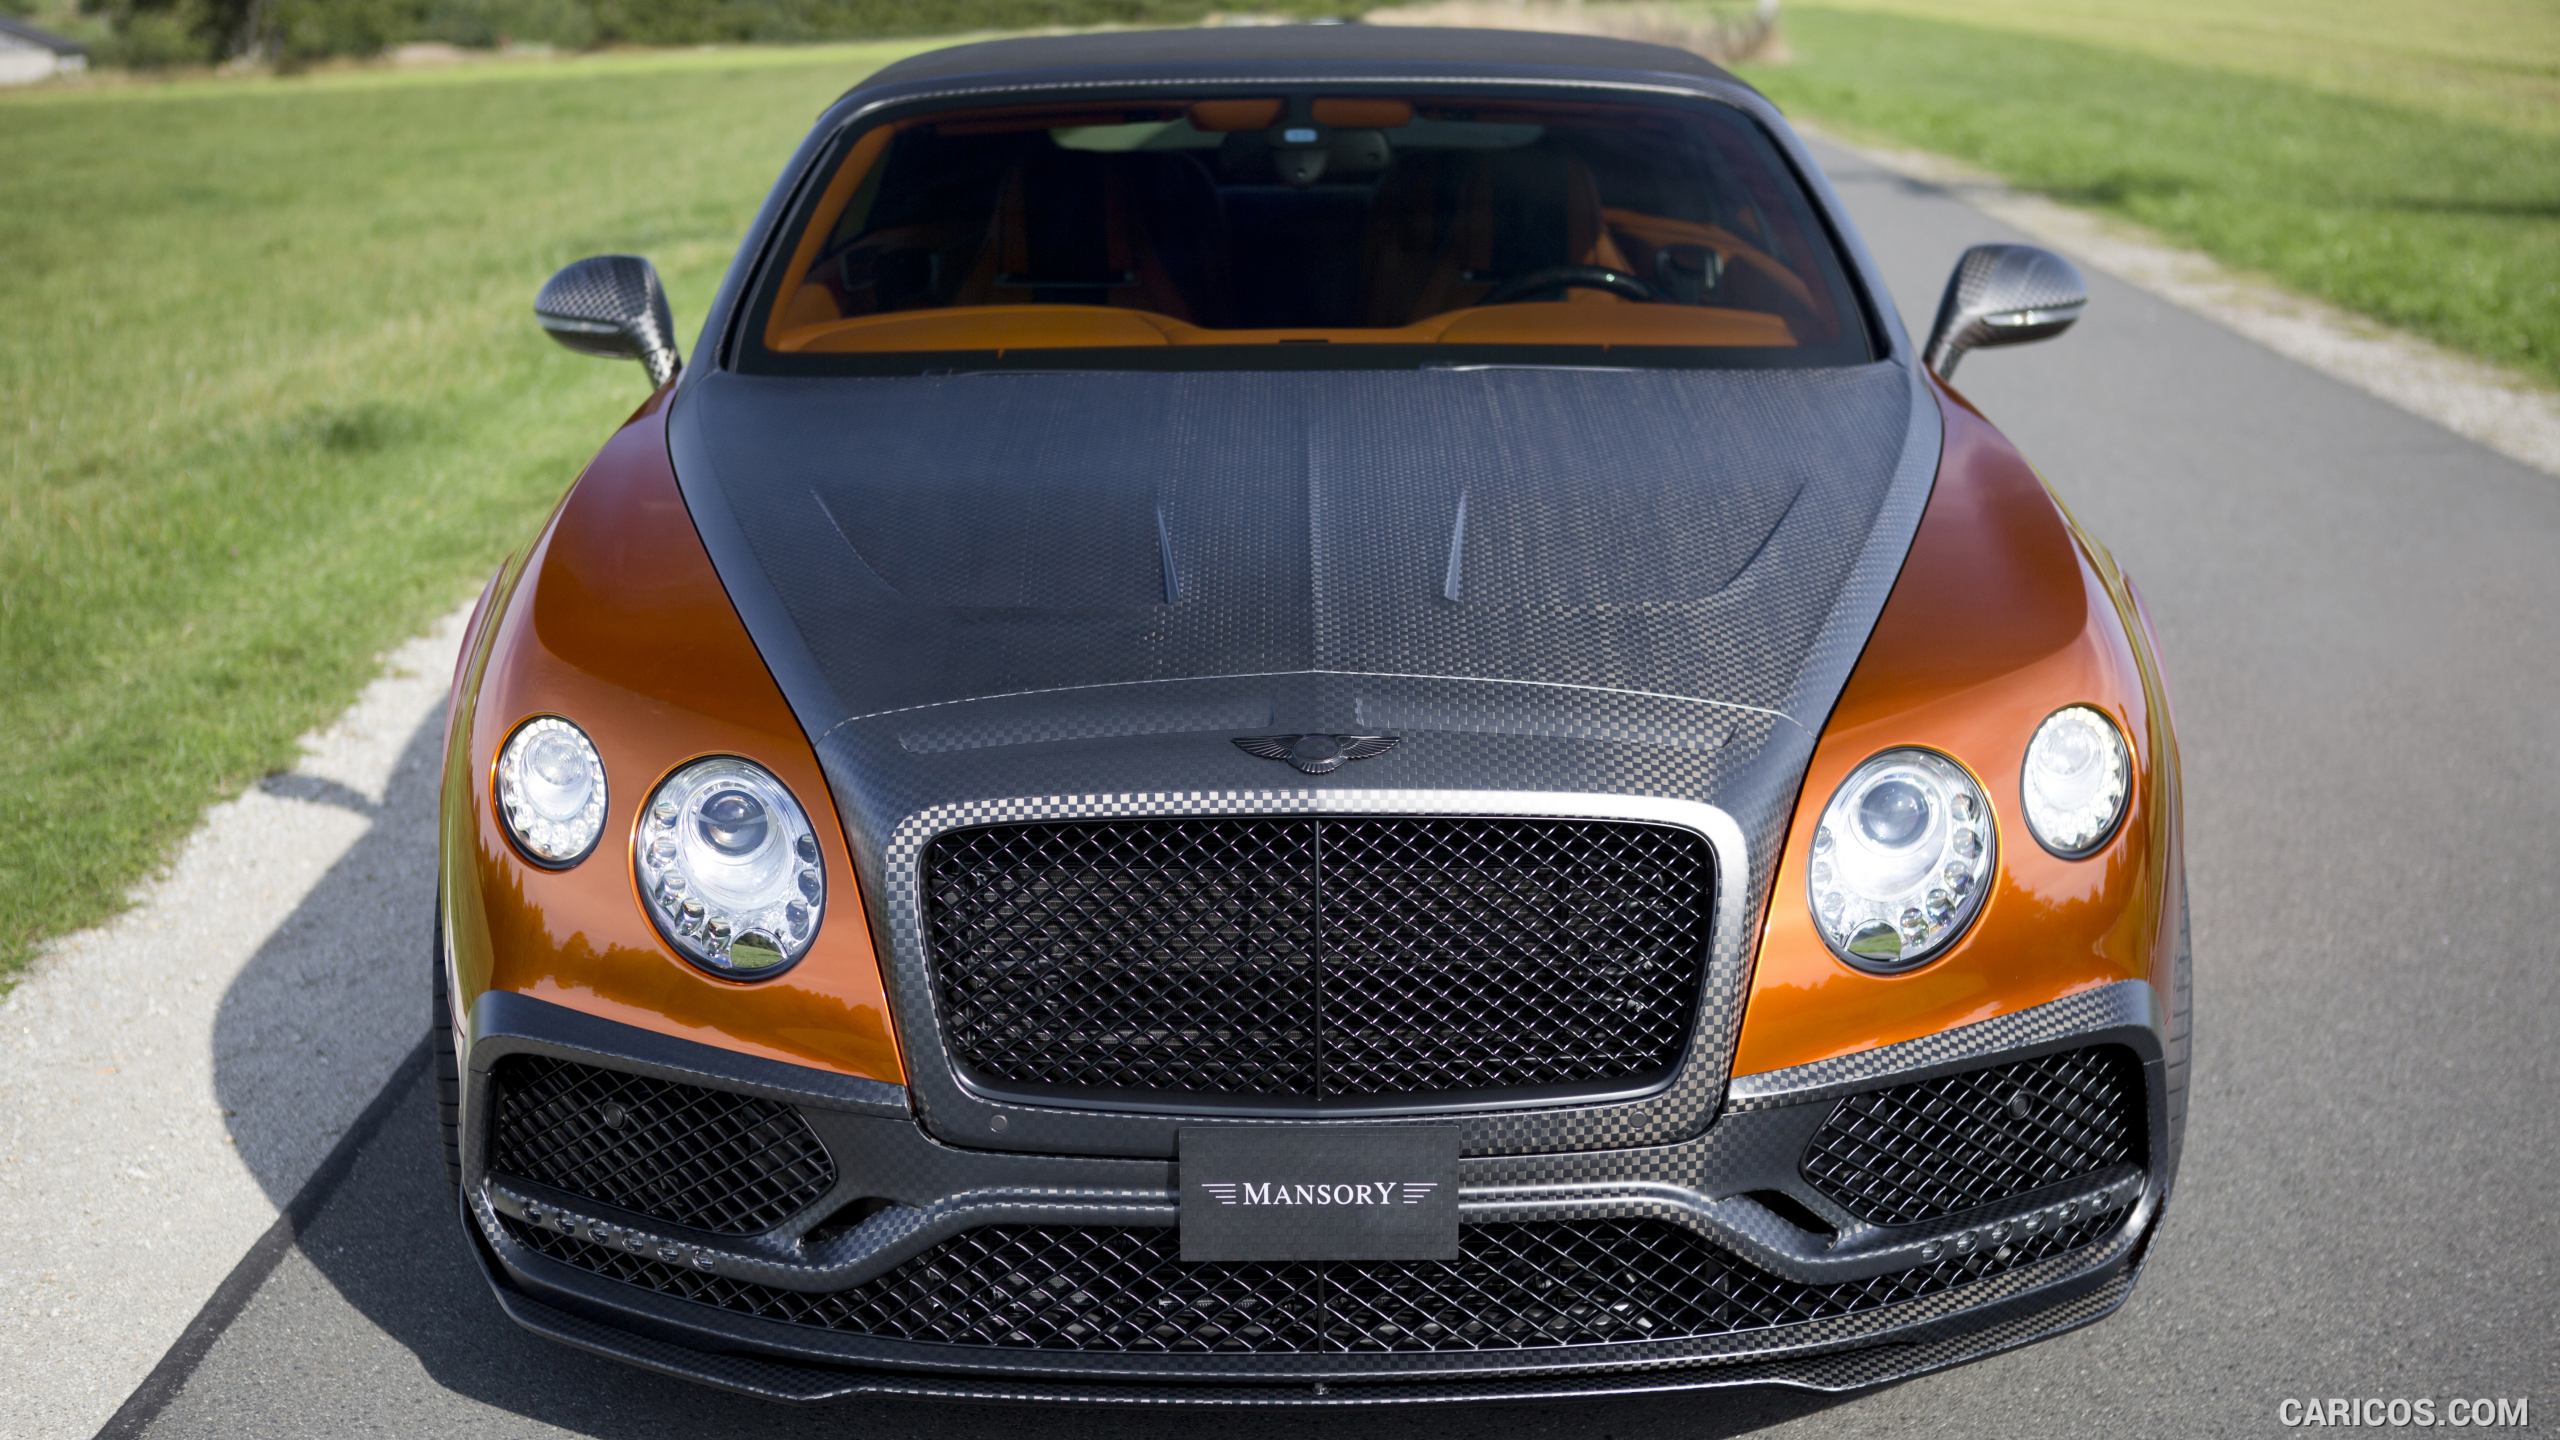 2016 MANSORY Bentley Continental GT Convertible - Front, #7 of 13